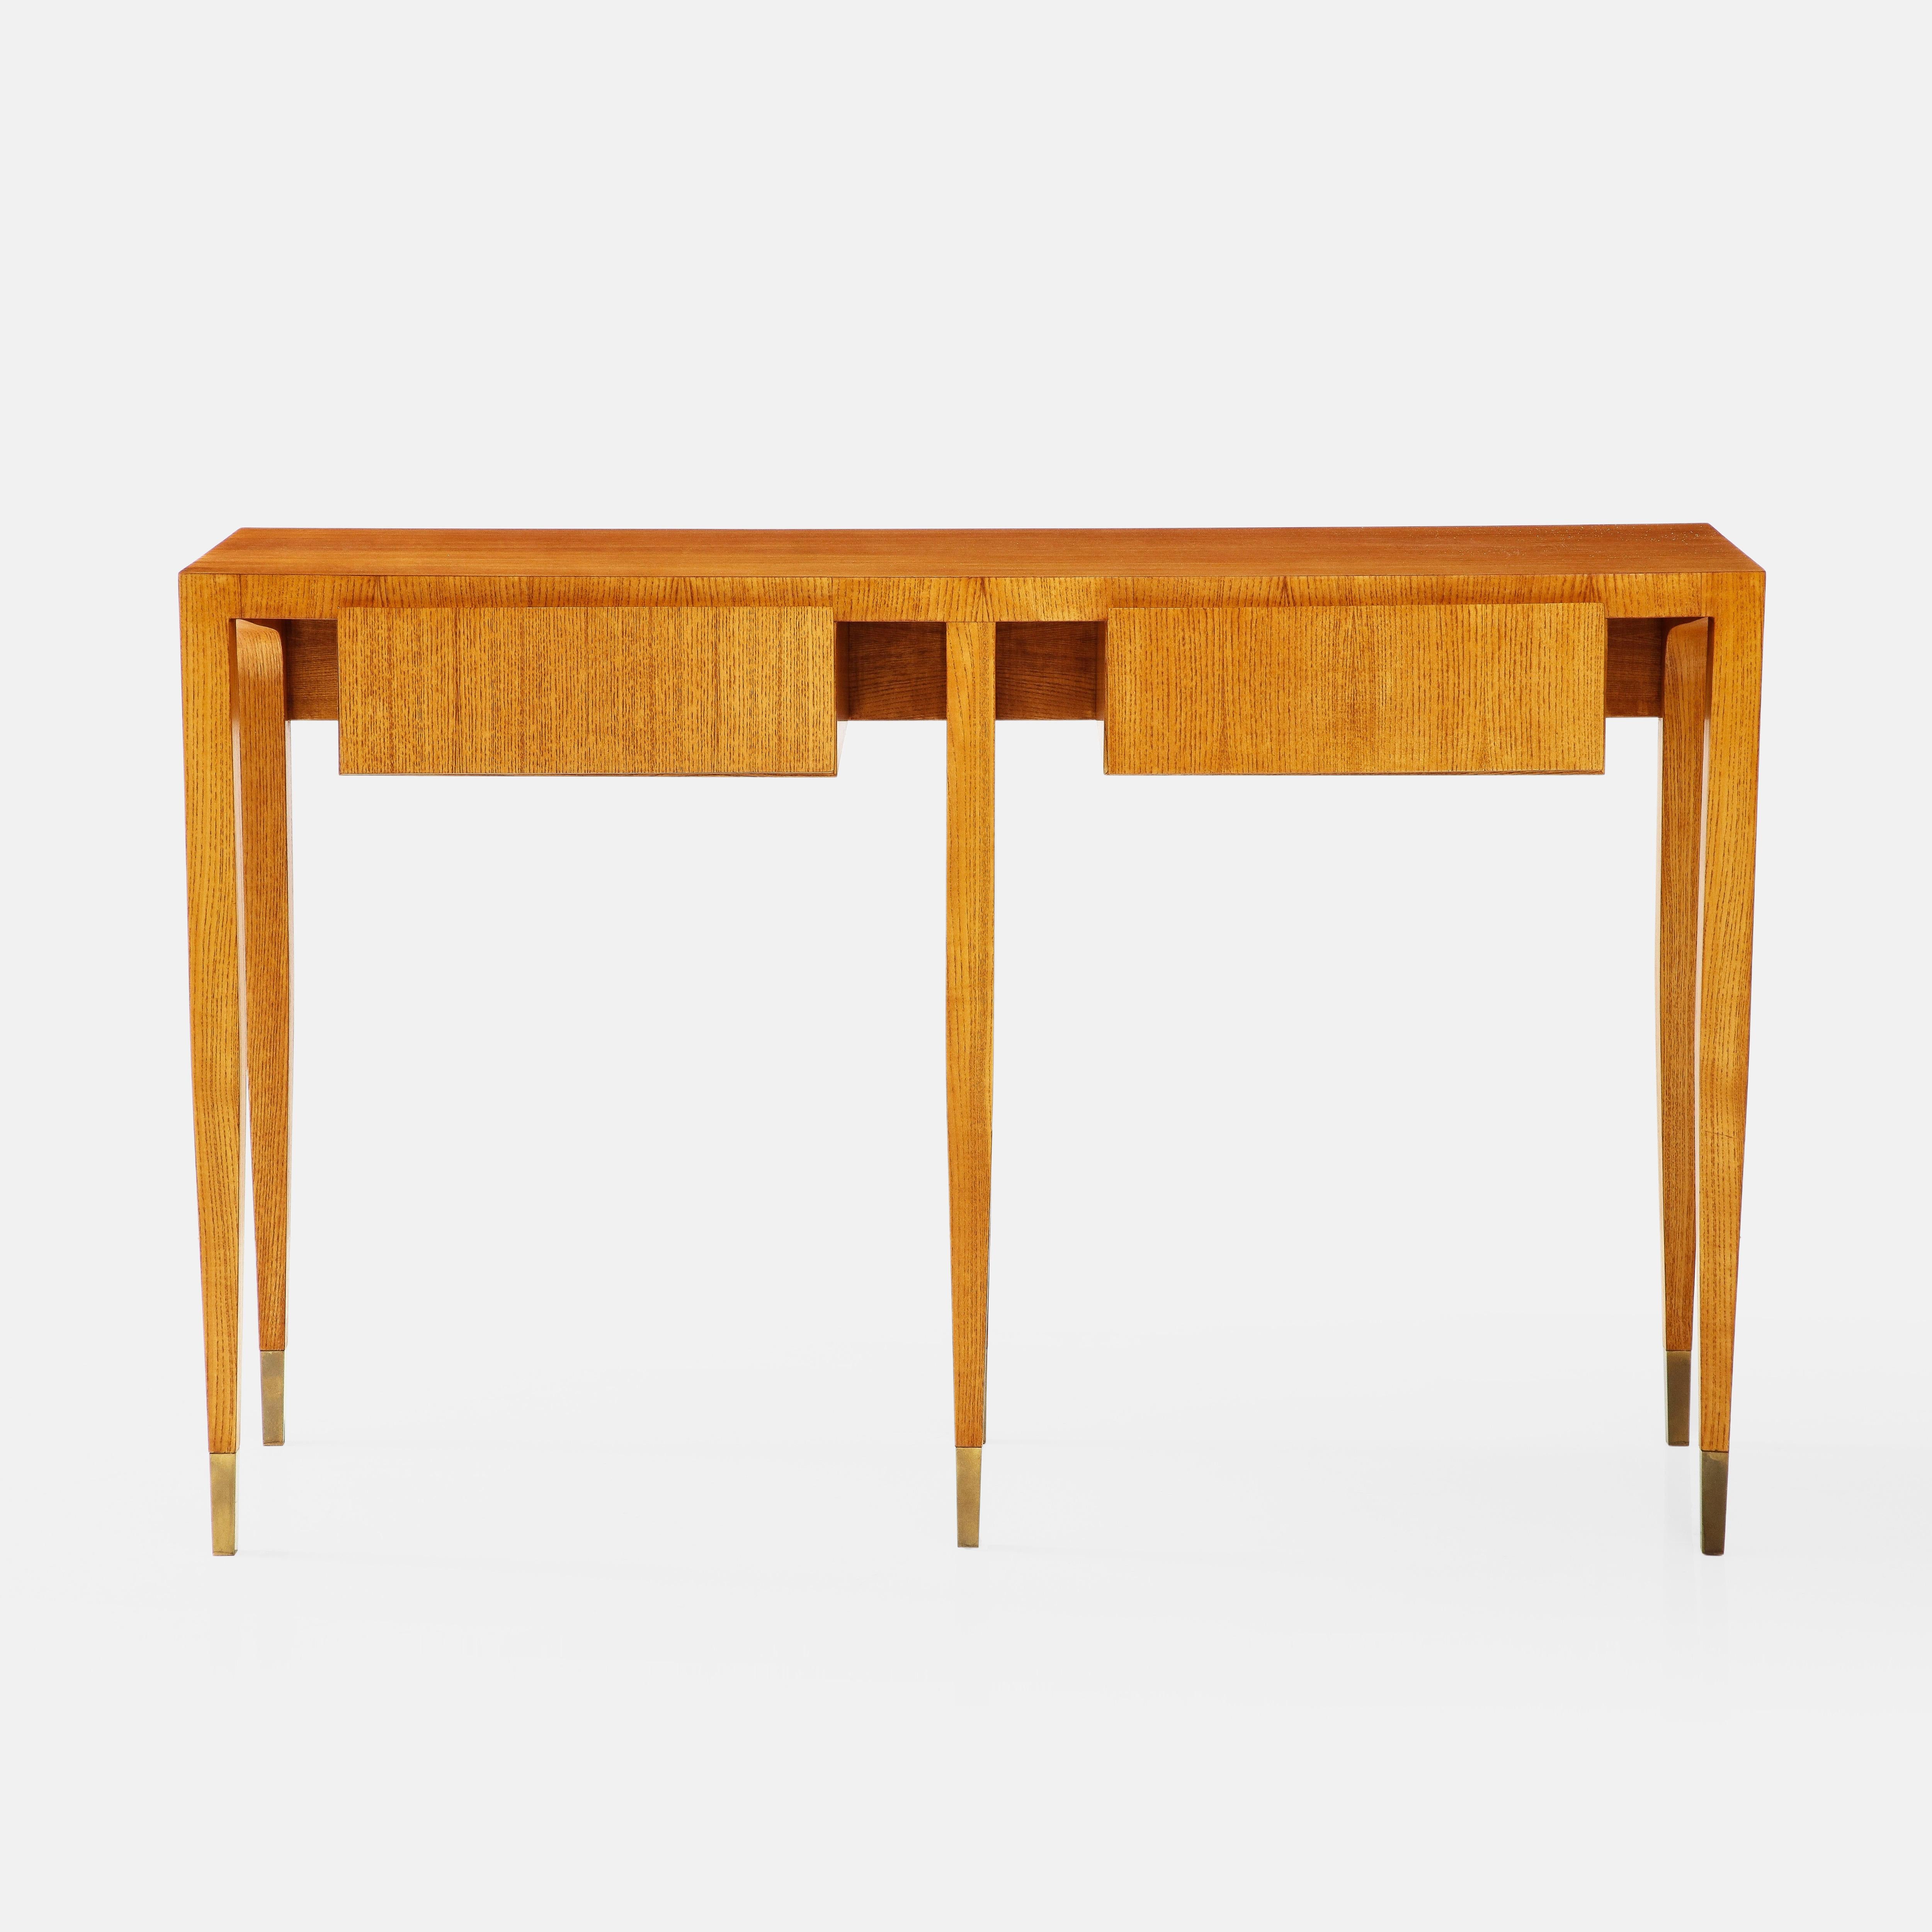 Gio Ponti for Giordano Chiesa Rare Pair of Ash Wood Consoles, Italy, 1950s For Sale 6